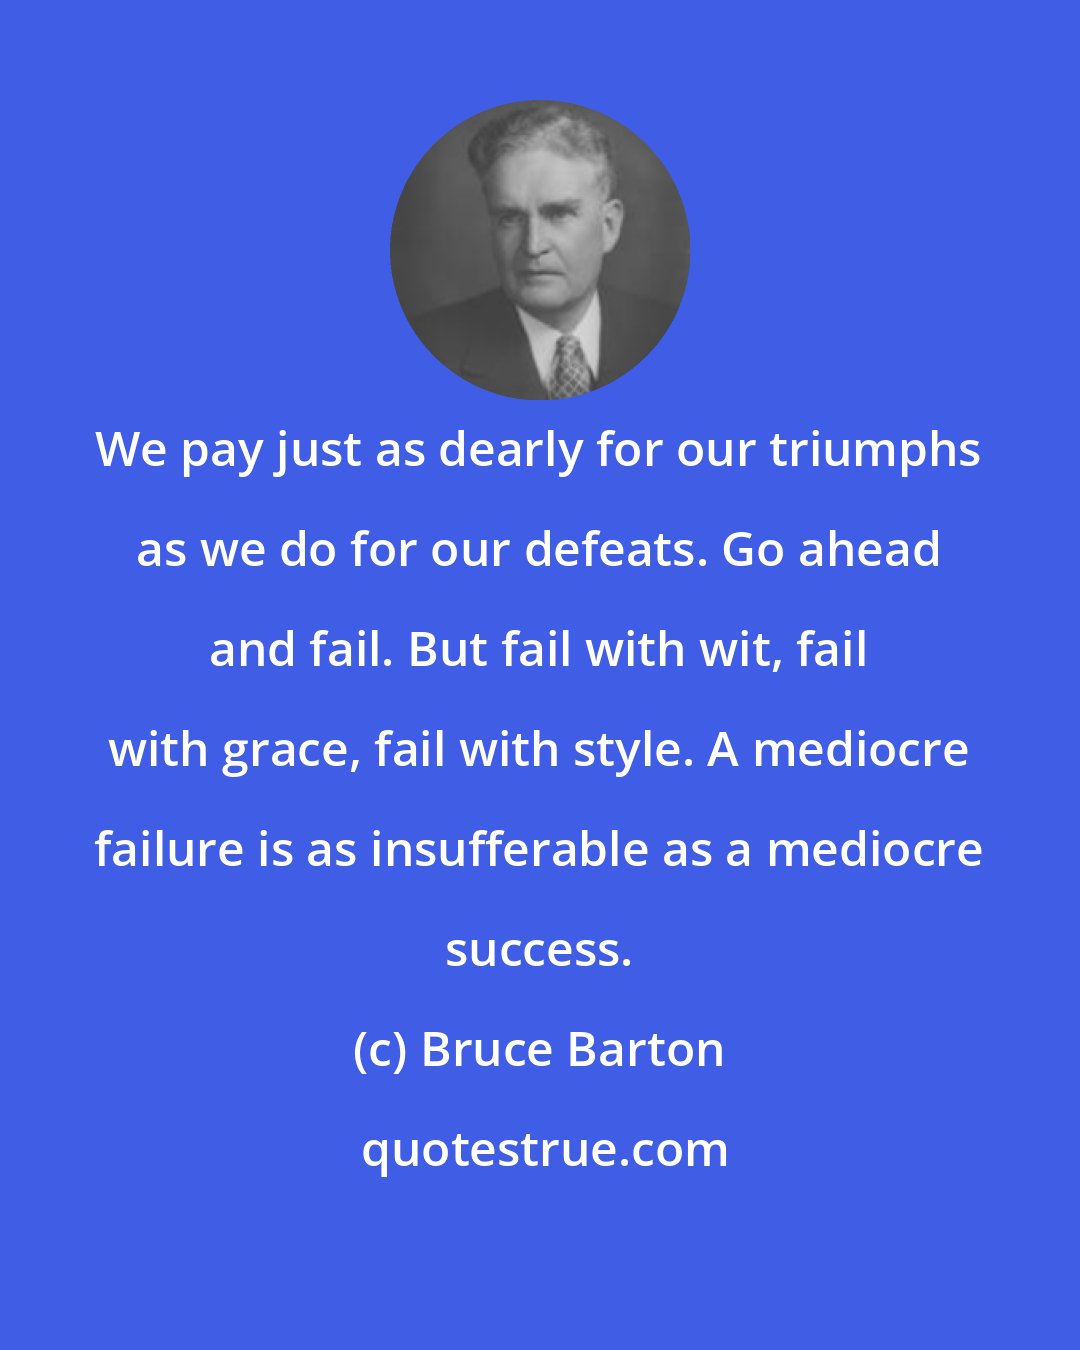 Bruce Barton: We pay just as dearly for our triumphs as we do for our defeats. Go ahead and fail. But fail with wit, fail with grace, fail with style. A mediocre failure is as insufferable as a mediocre success.